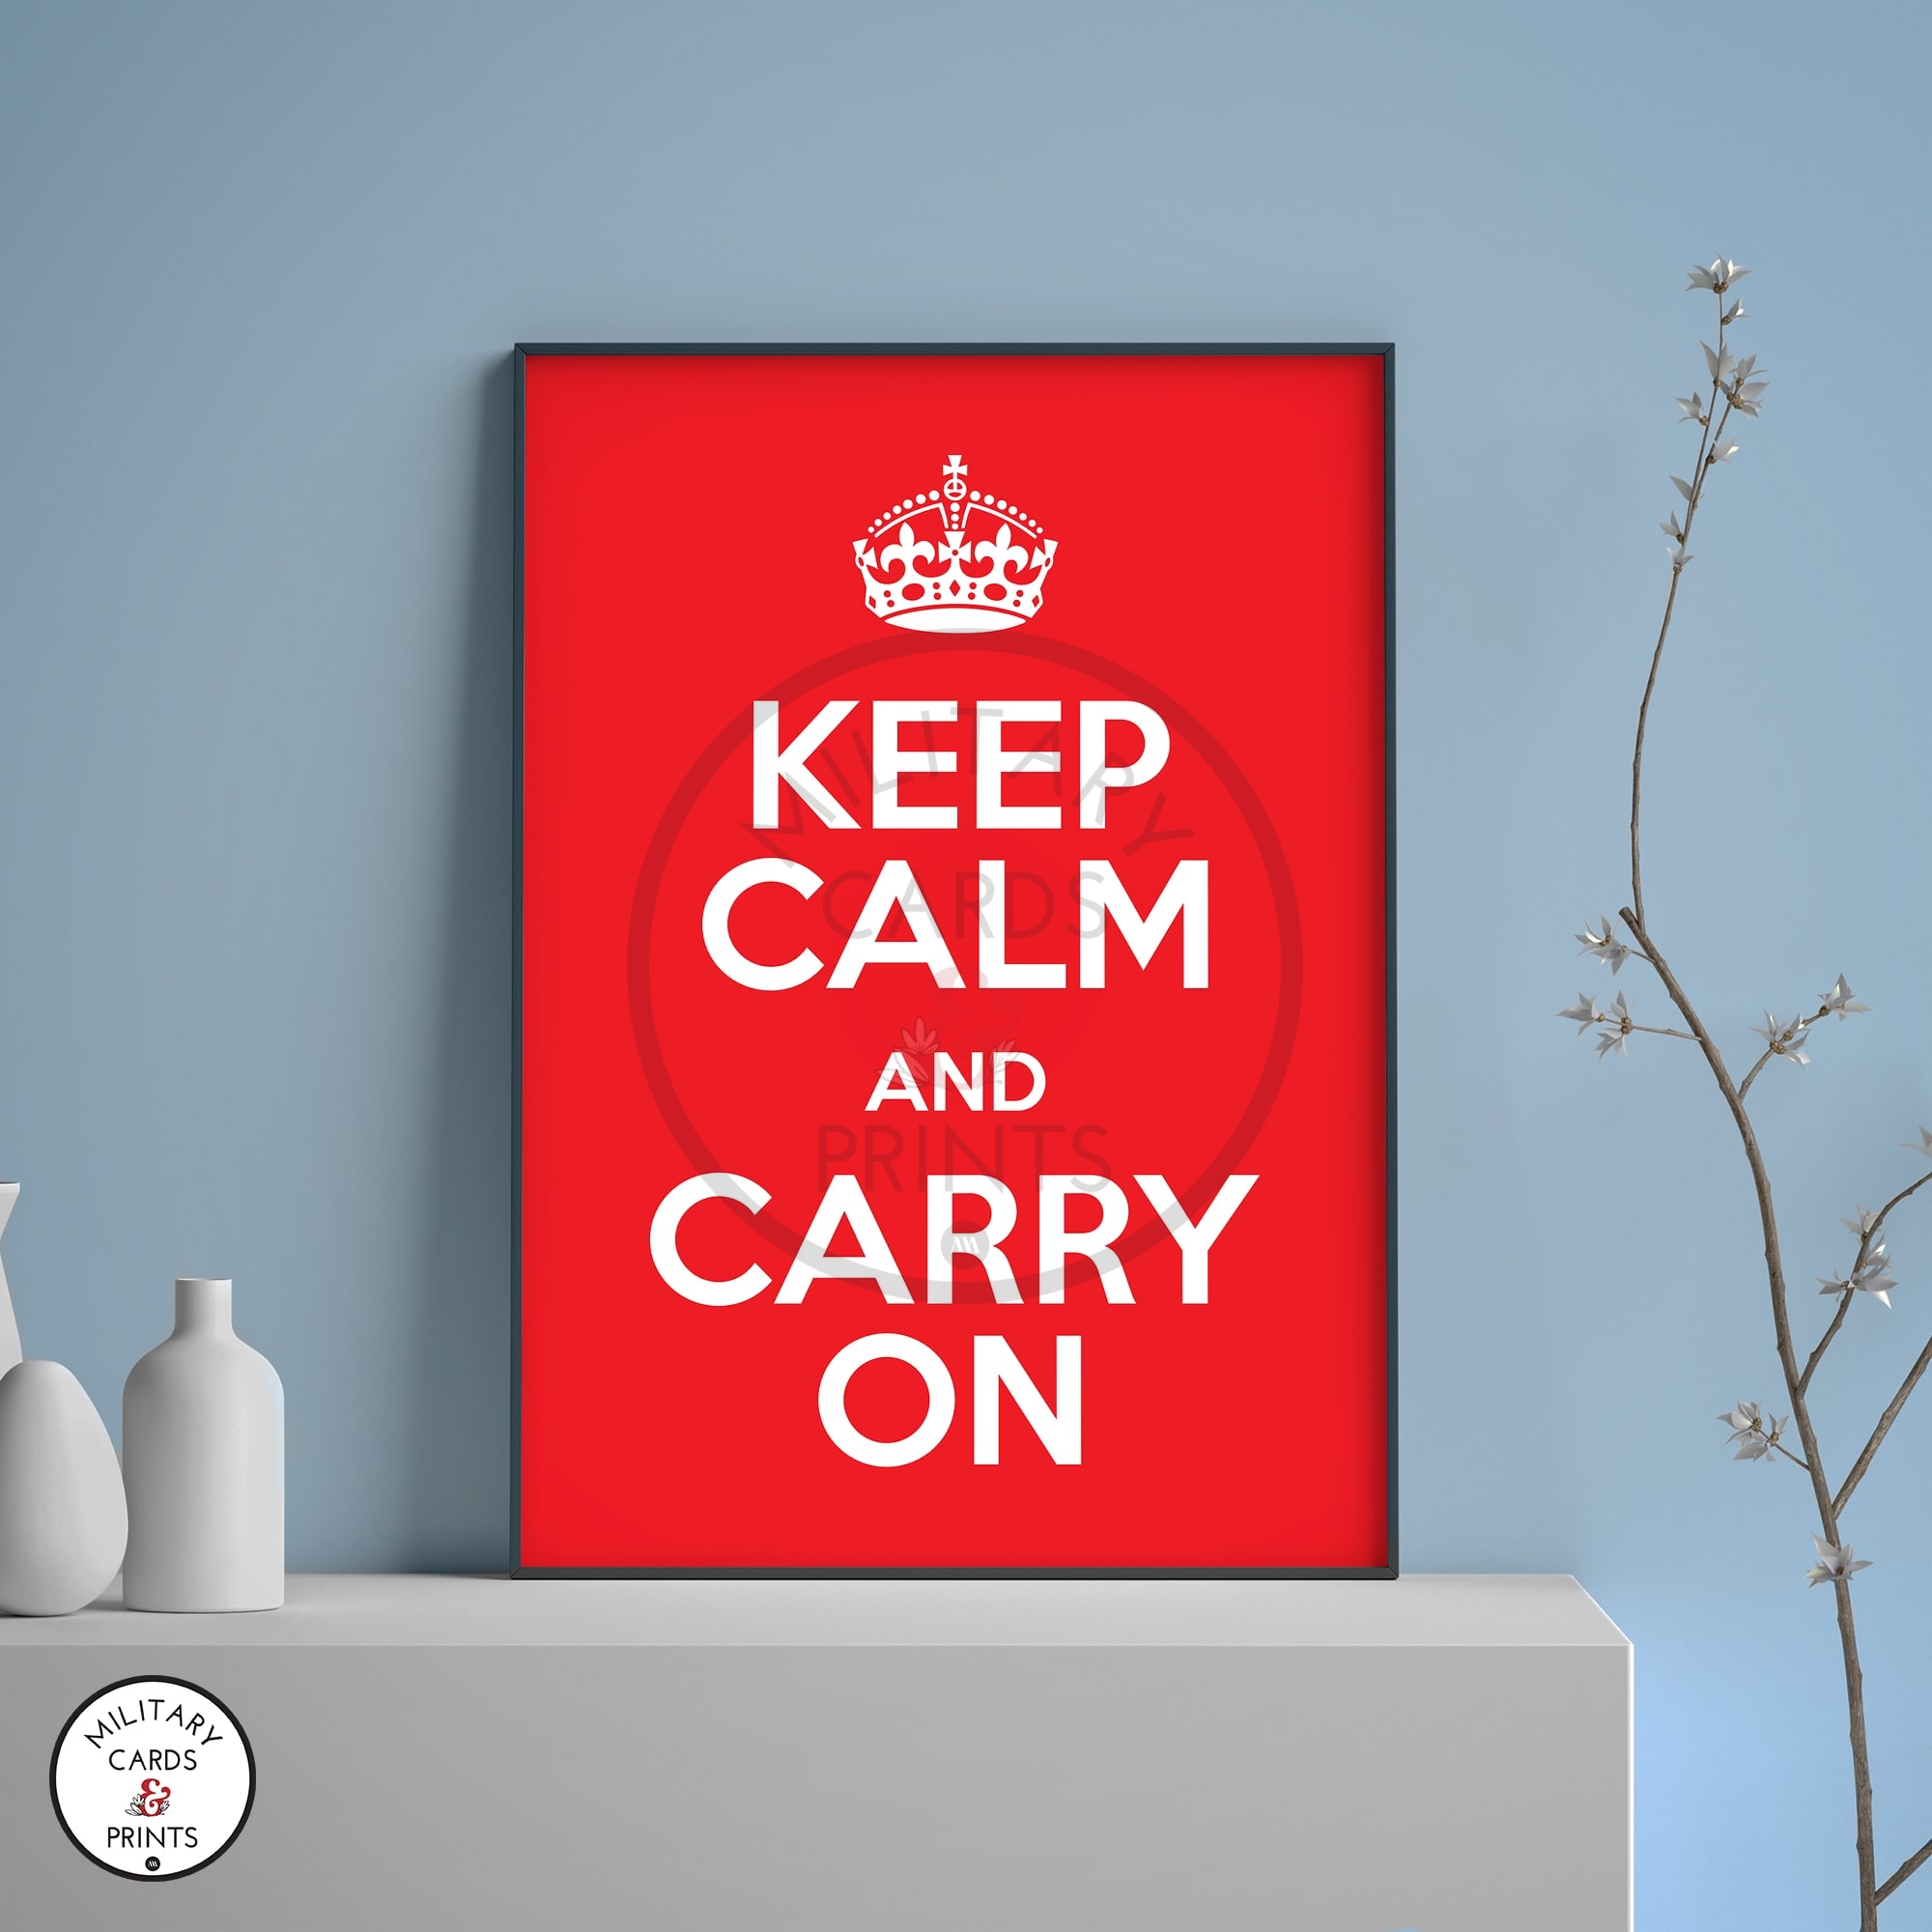 keep-calm-and-carry-on-print-military-cards-prints